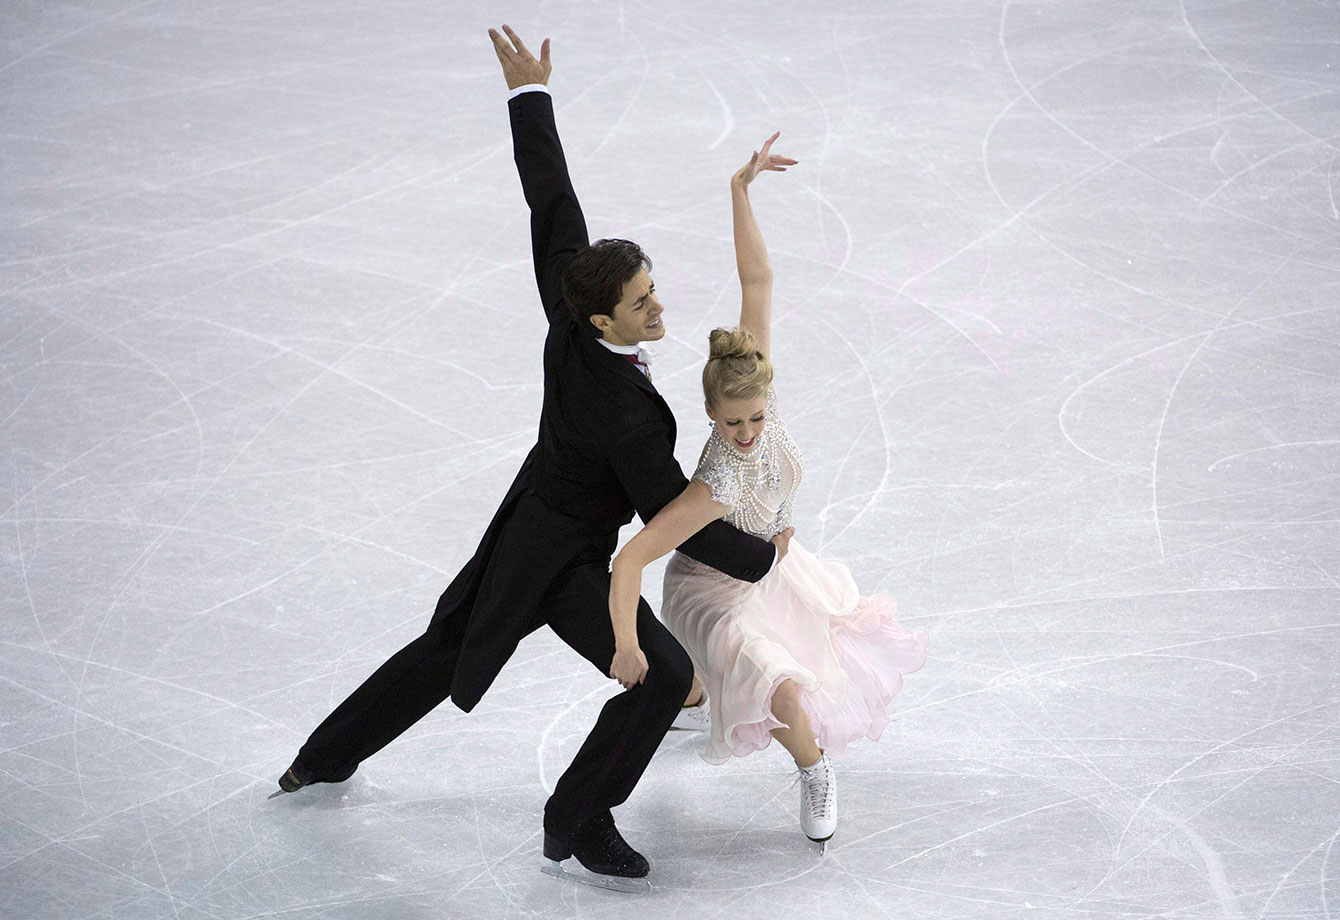 Kaitlyn Weaver and Andrew Poje during their short program on October 30, 2015 at Skate Canada International. 